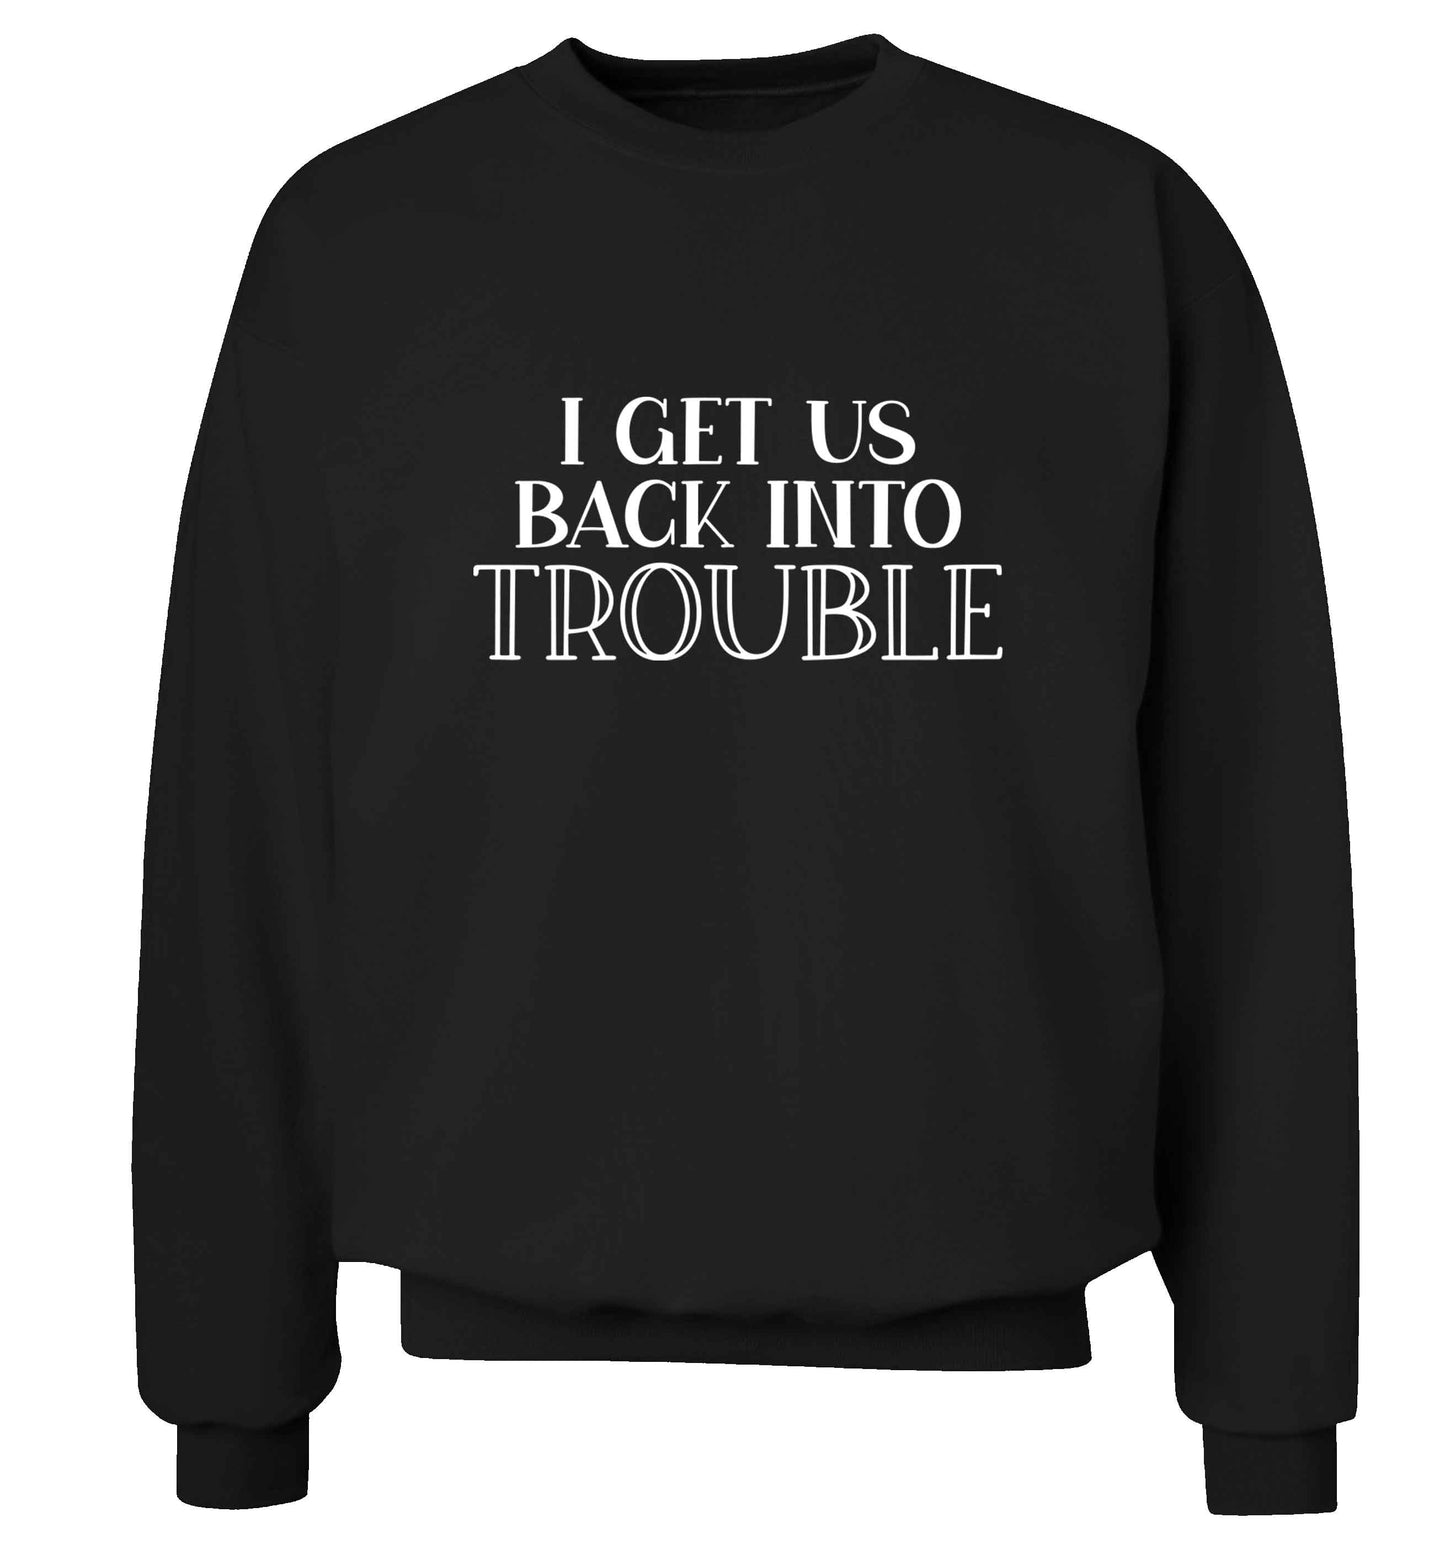 I get us back into trouble adult's unisex black sweater 2XL